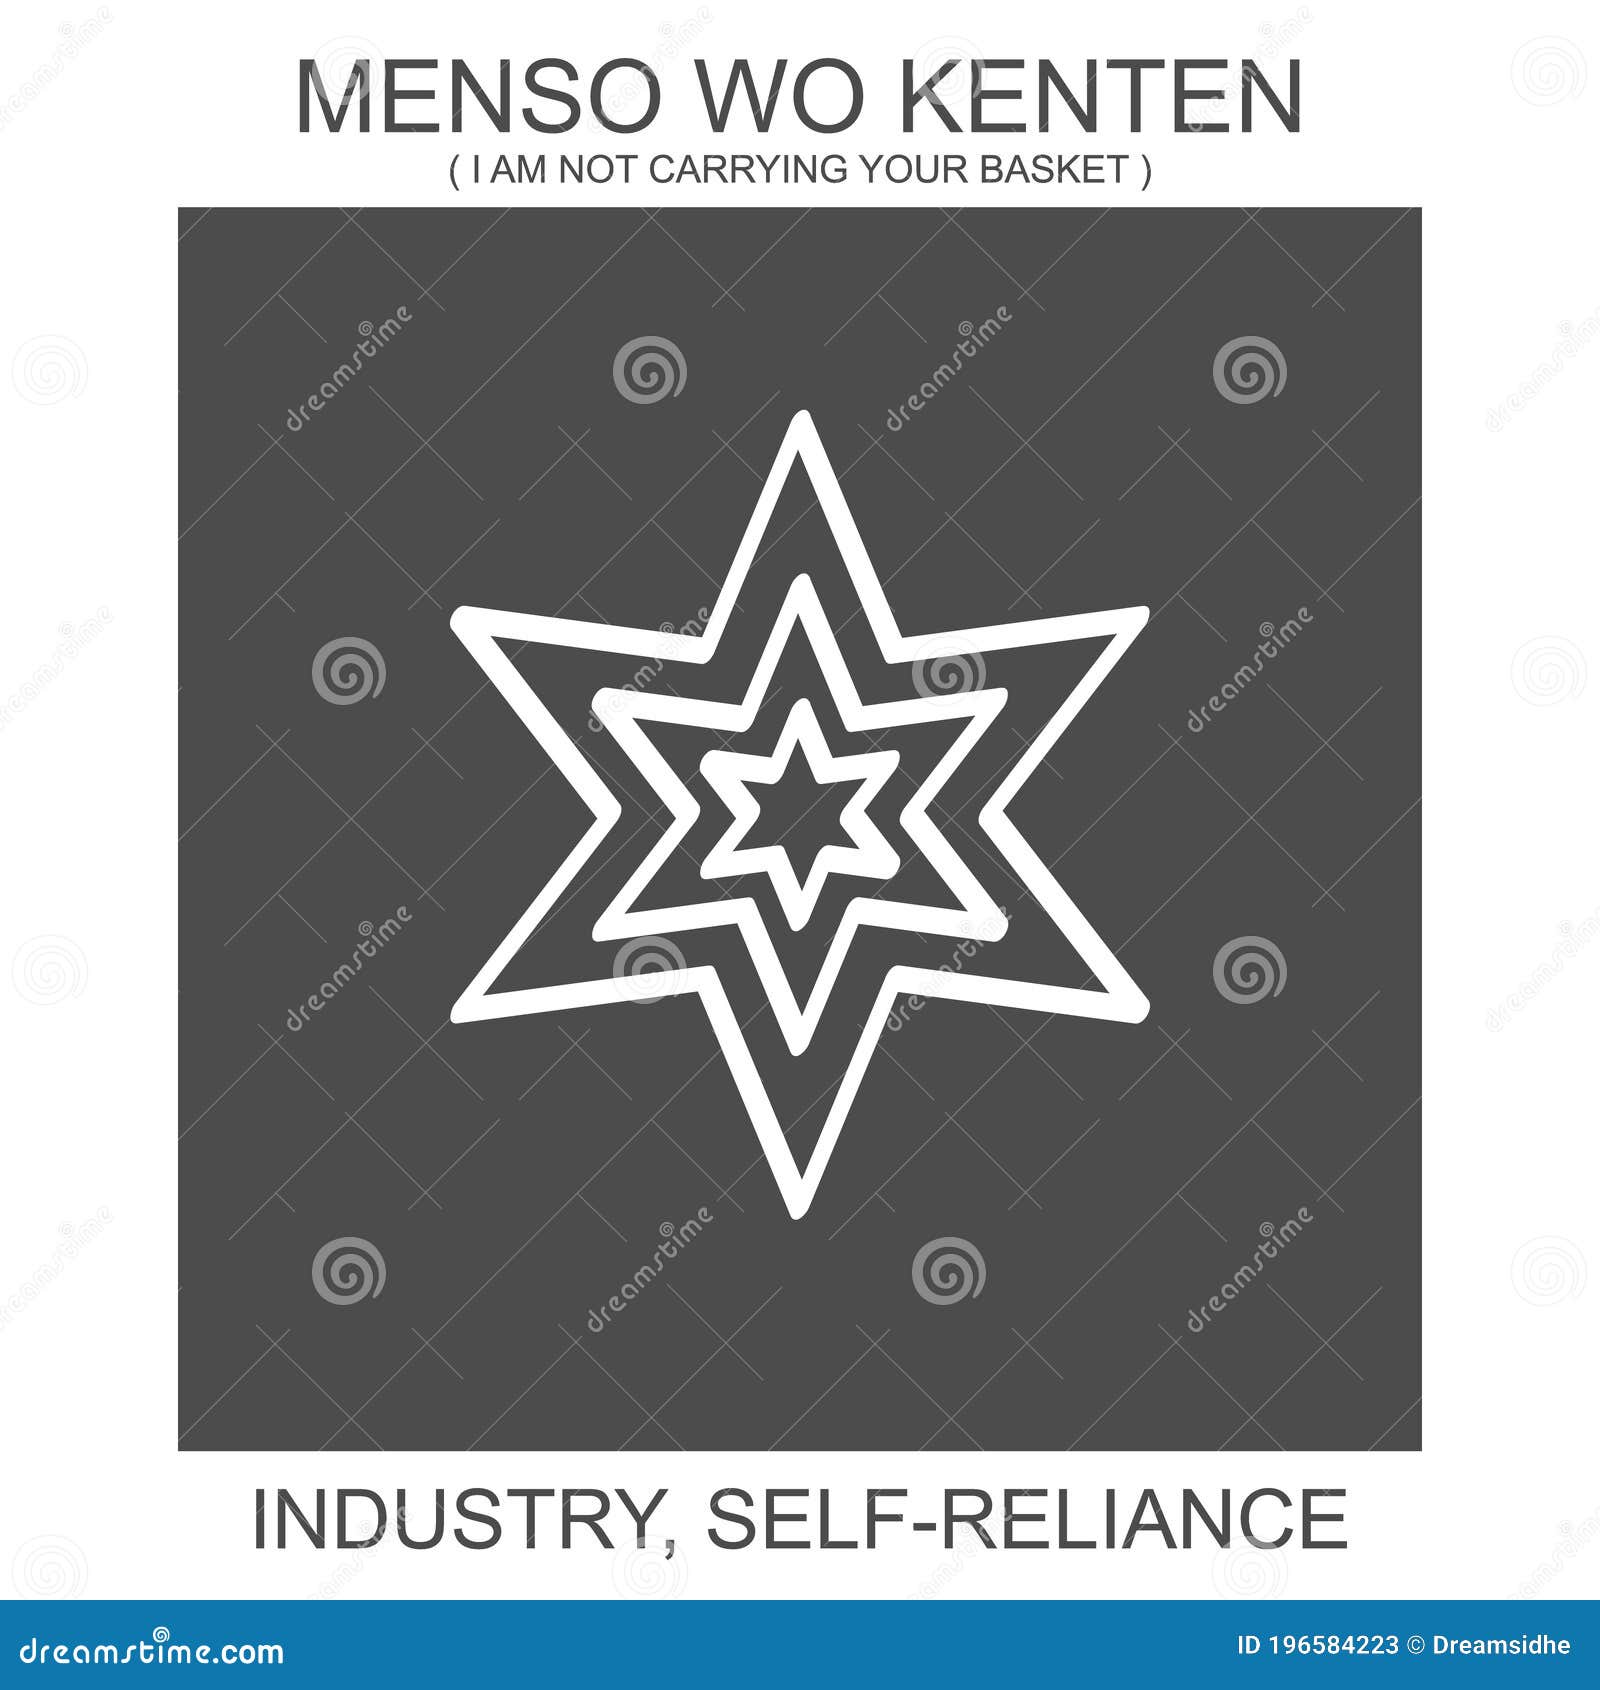 icon with african adinkra  menso wo kenten.  of industry and self reliance